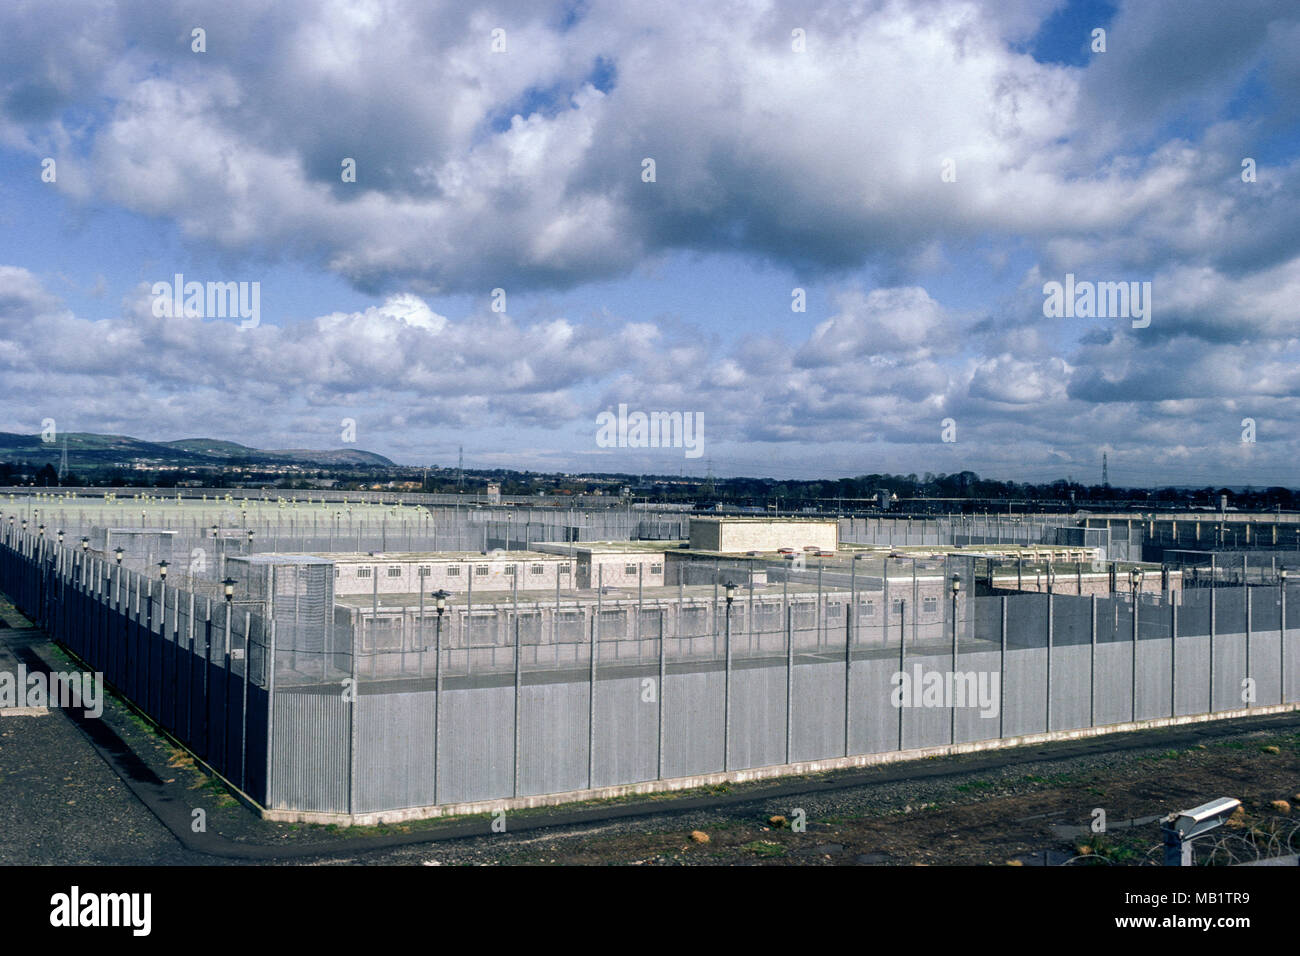 The Maze Prison County Down Northern Ireland formely Long Kesh Detention Centre H blocks 1981 Stock Photo